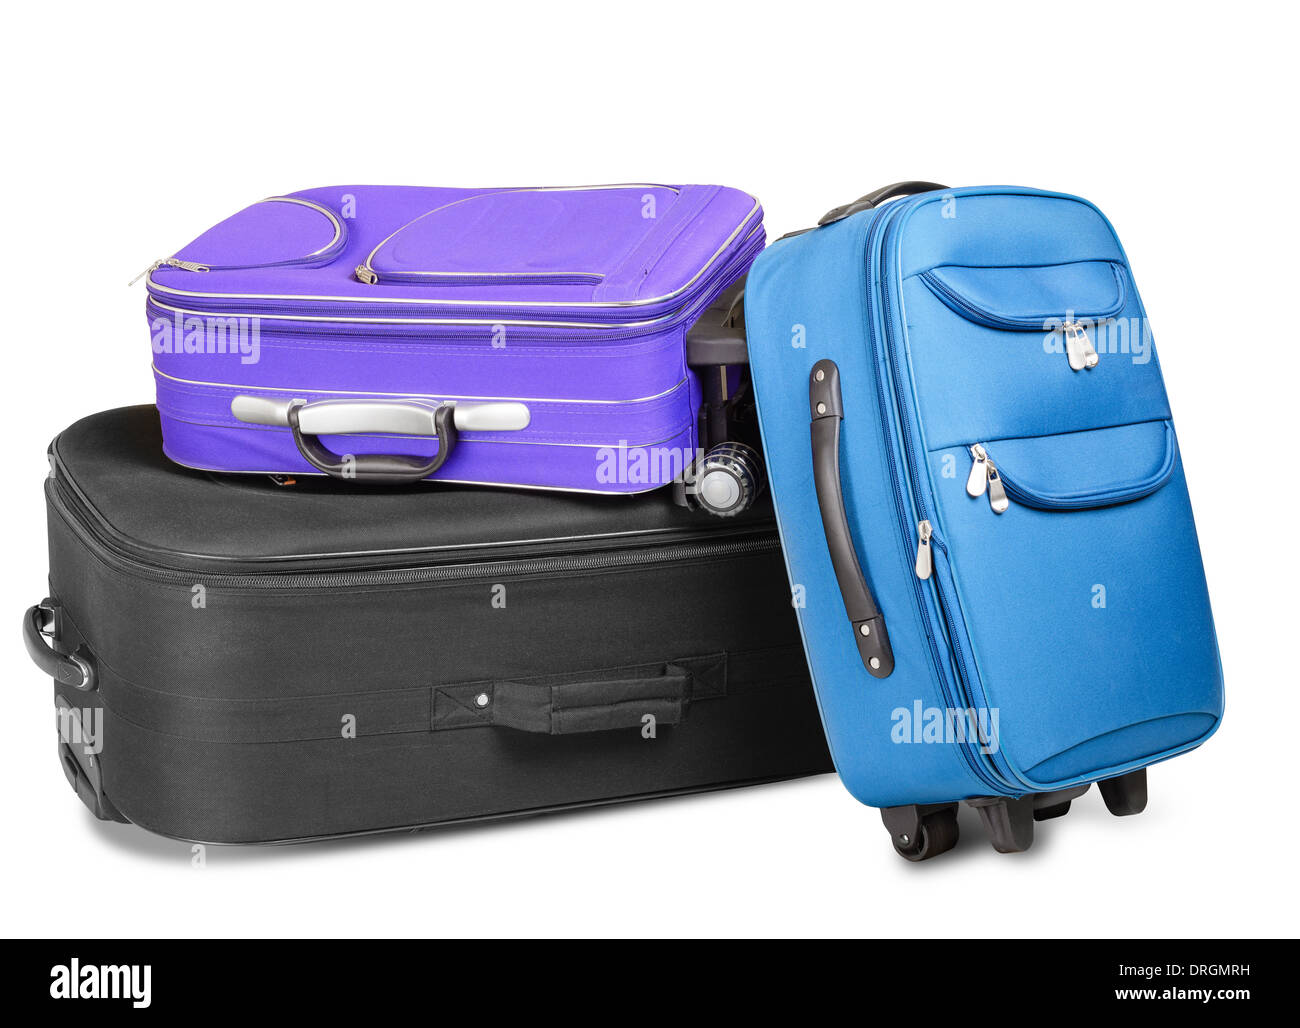 Three full and closed suitcases, black, blue and violet, ready for the trip, isolated on white background Stock Photo